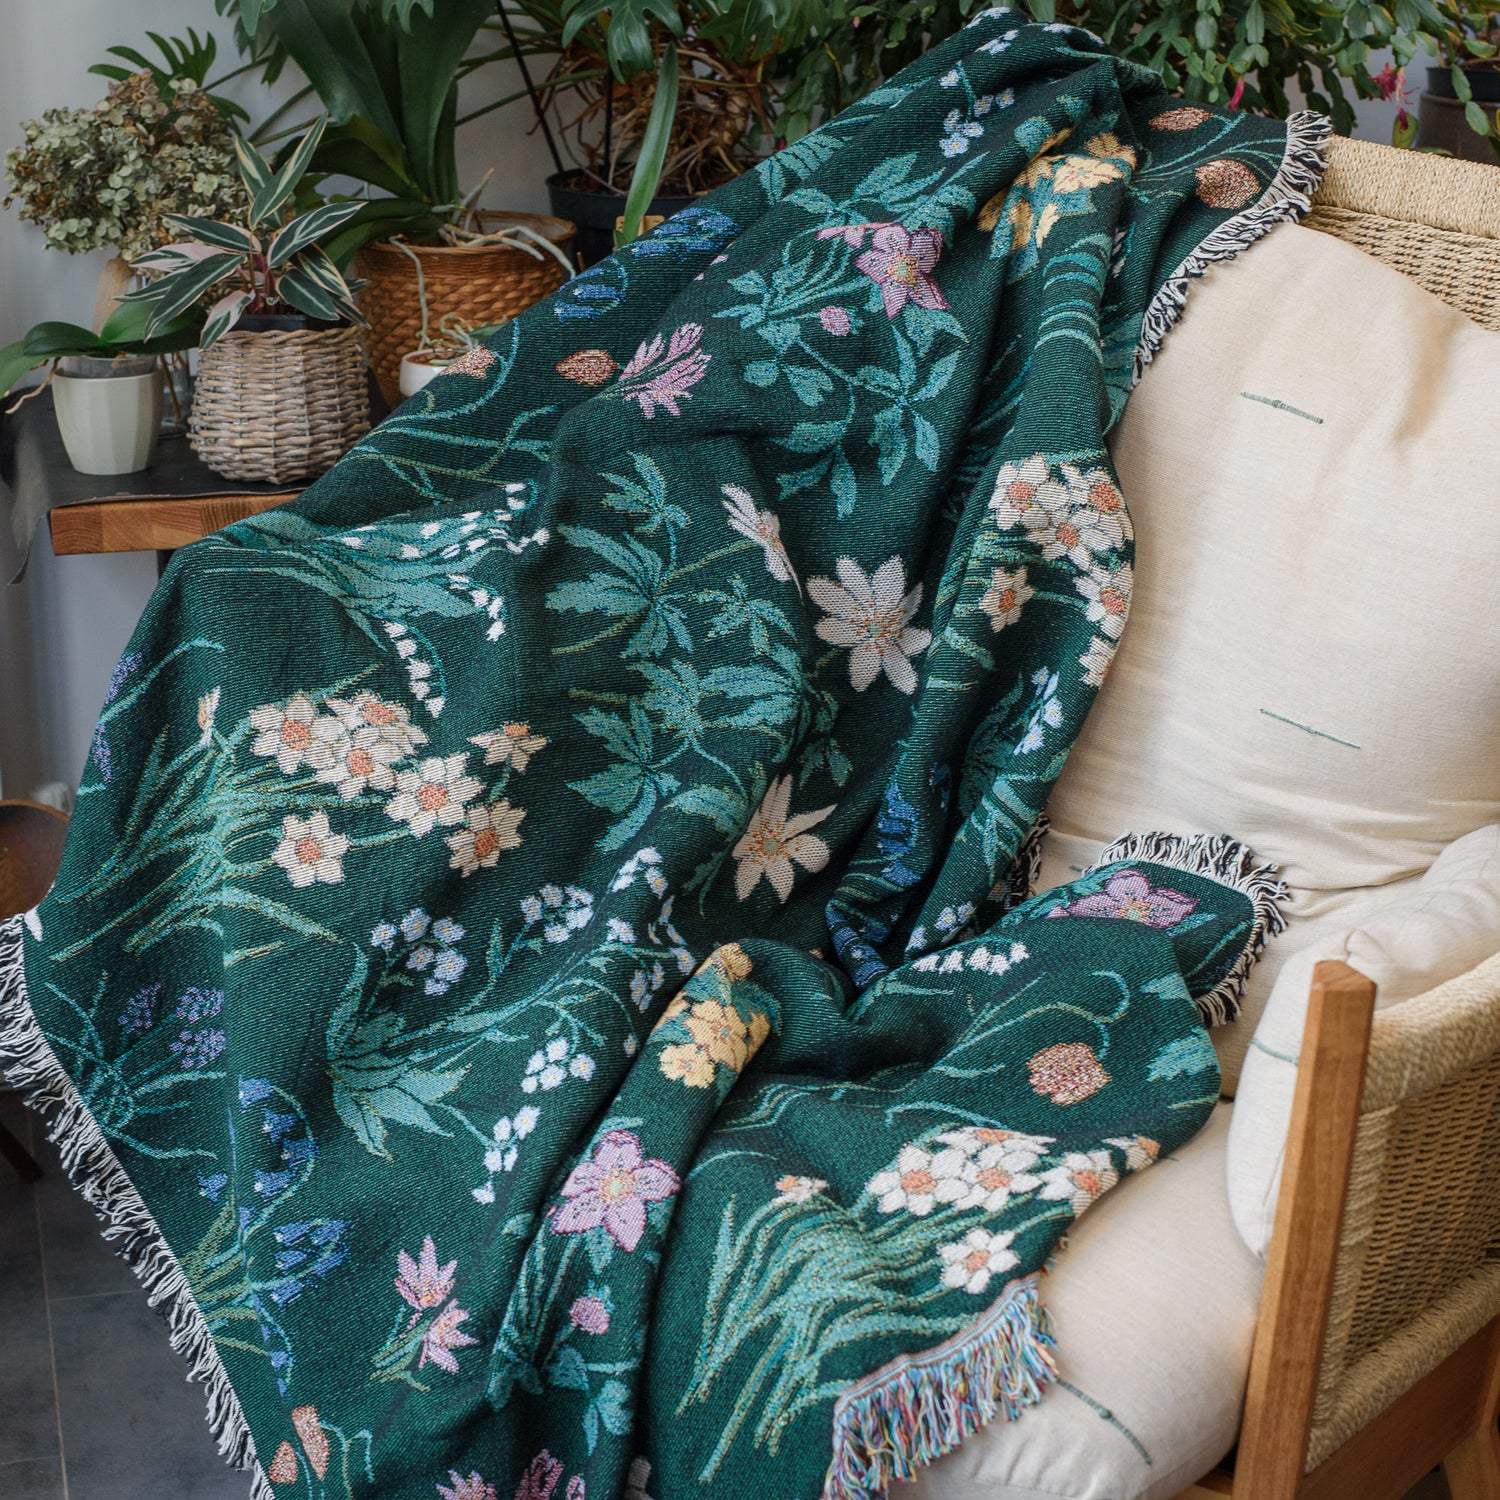 Spring flowers woven blanket in dark green with light coloured daffodils, forget me nots and bluebells spread across chair in home with houseplants